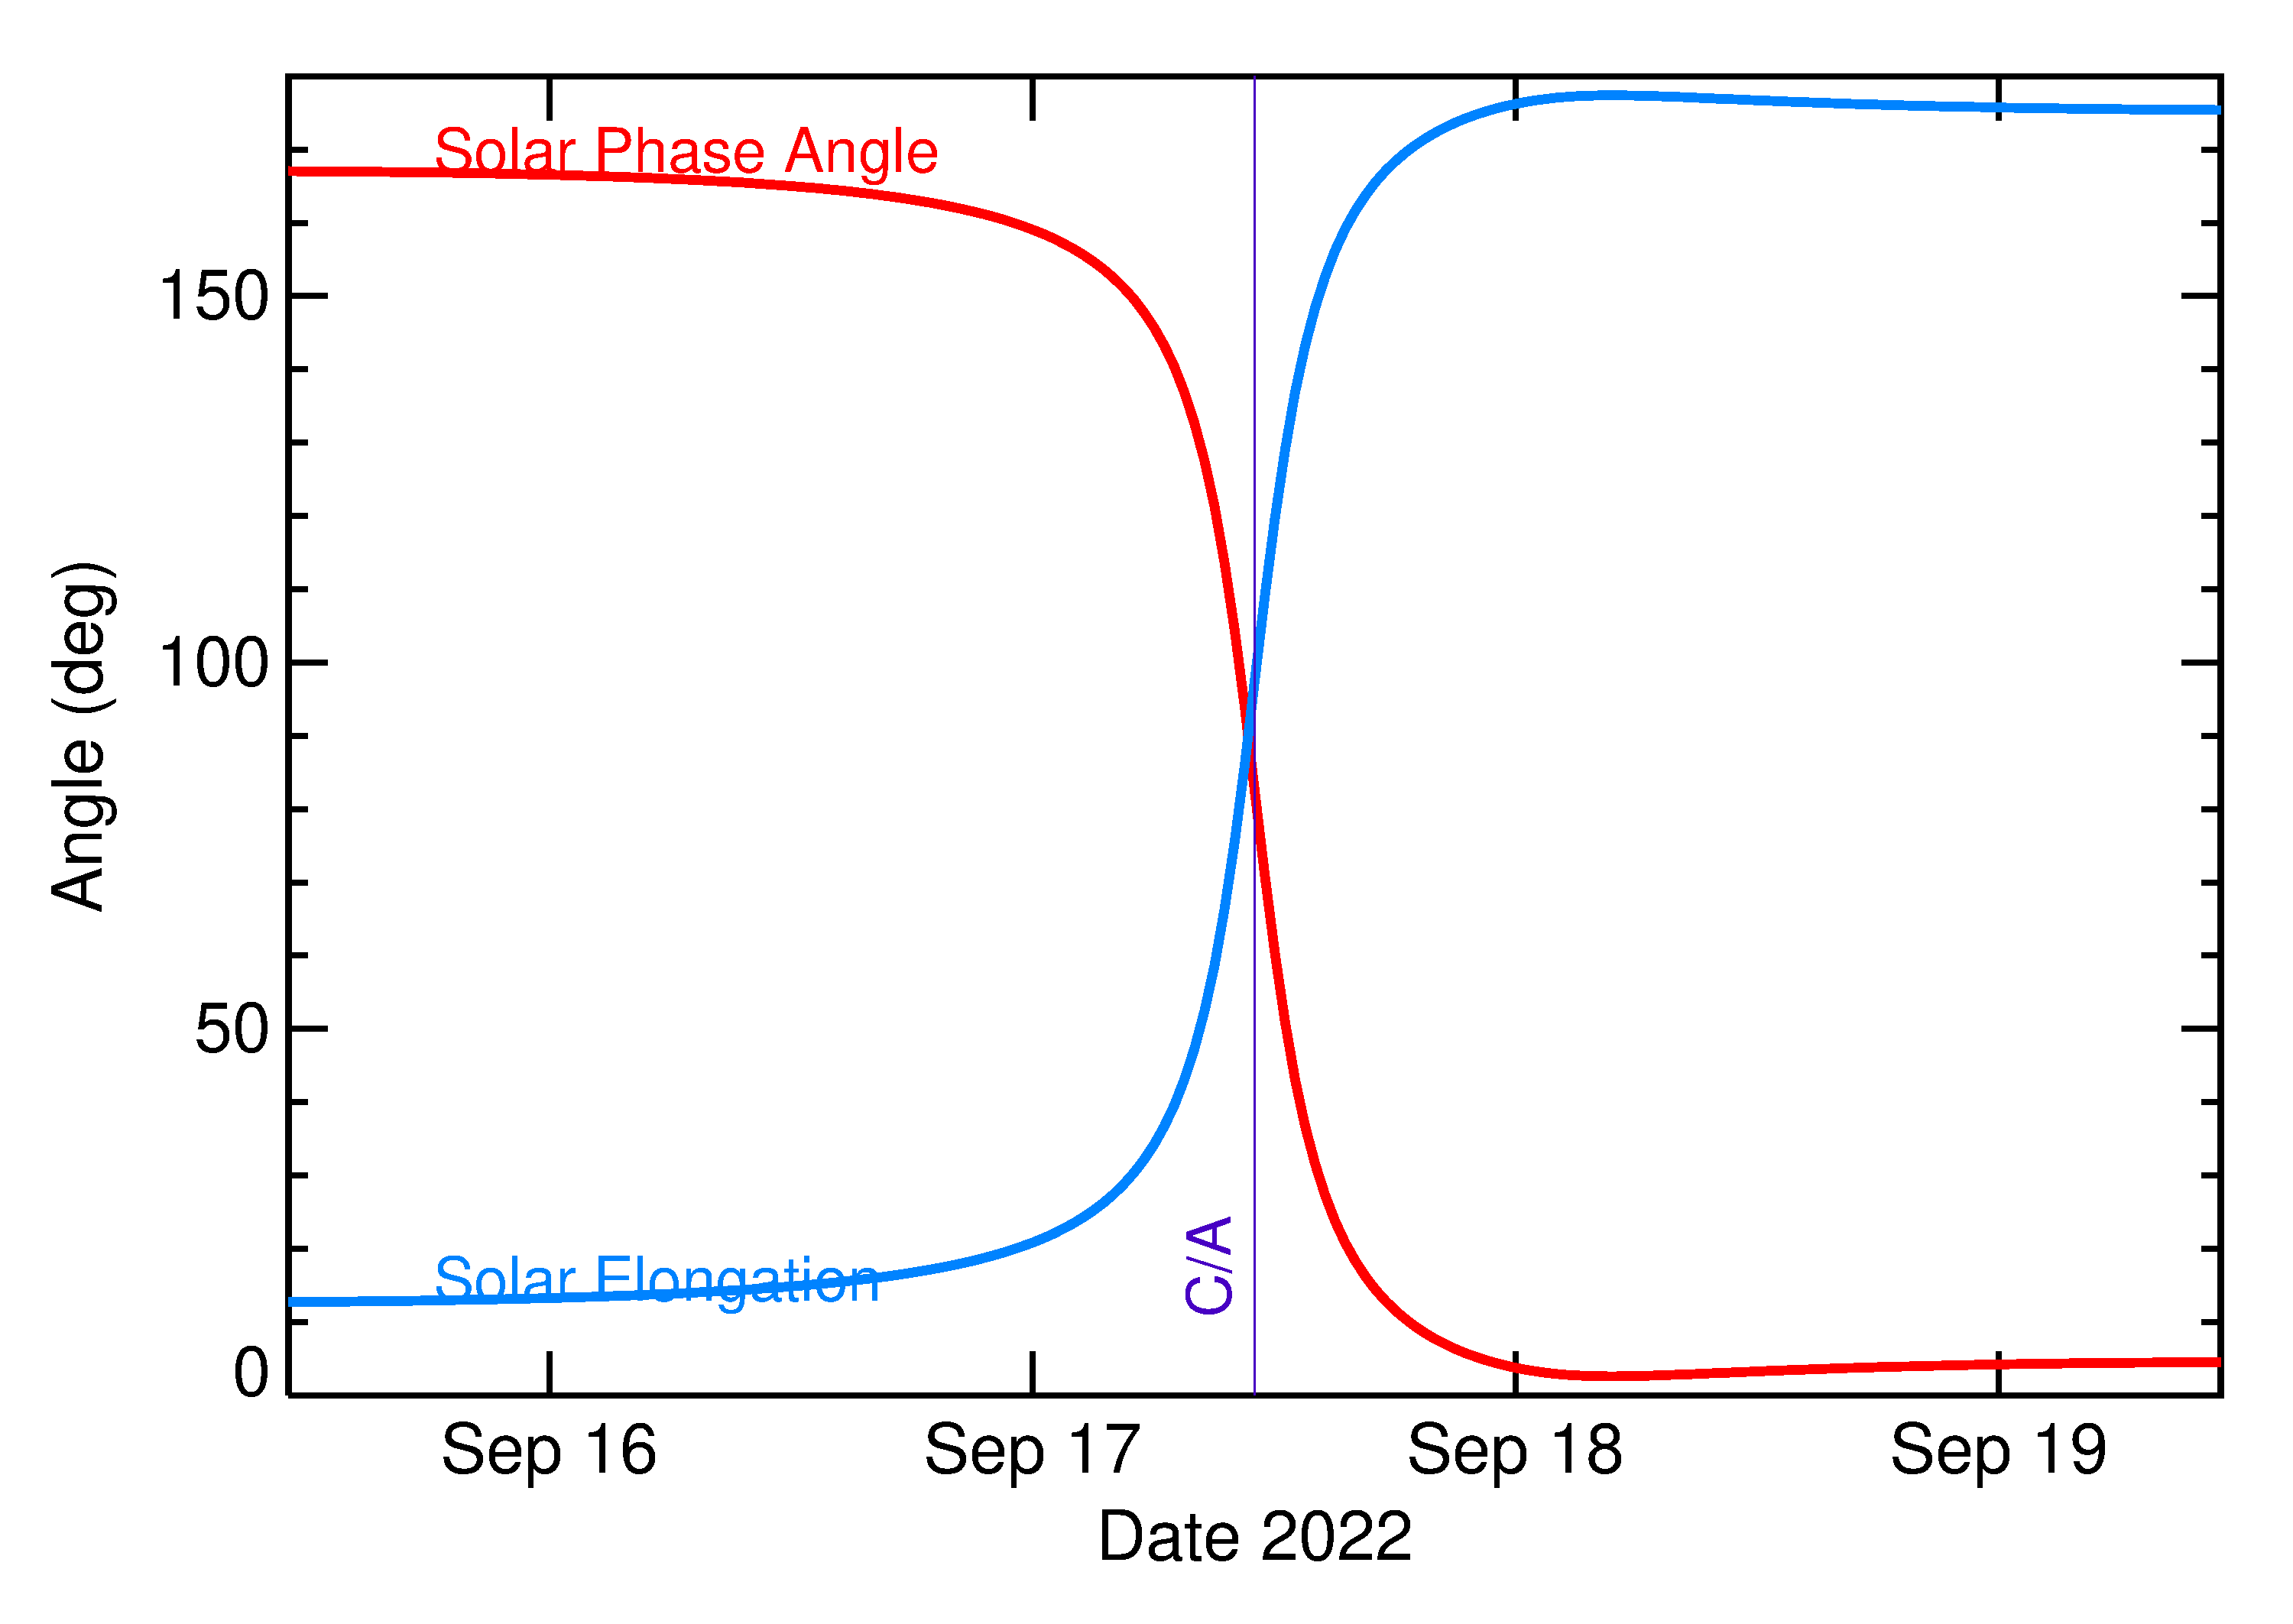 Solar Elongation and Solar Phase Angle of 2022 SJ3 in the days around closest approach